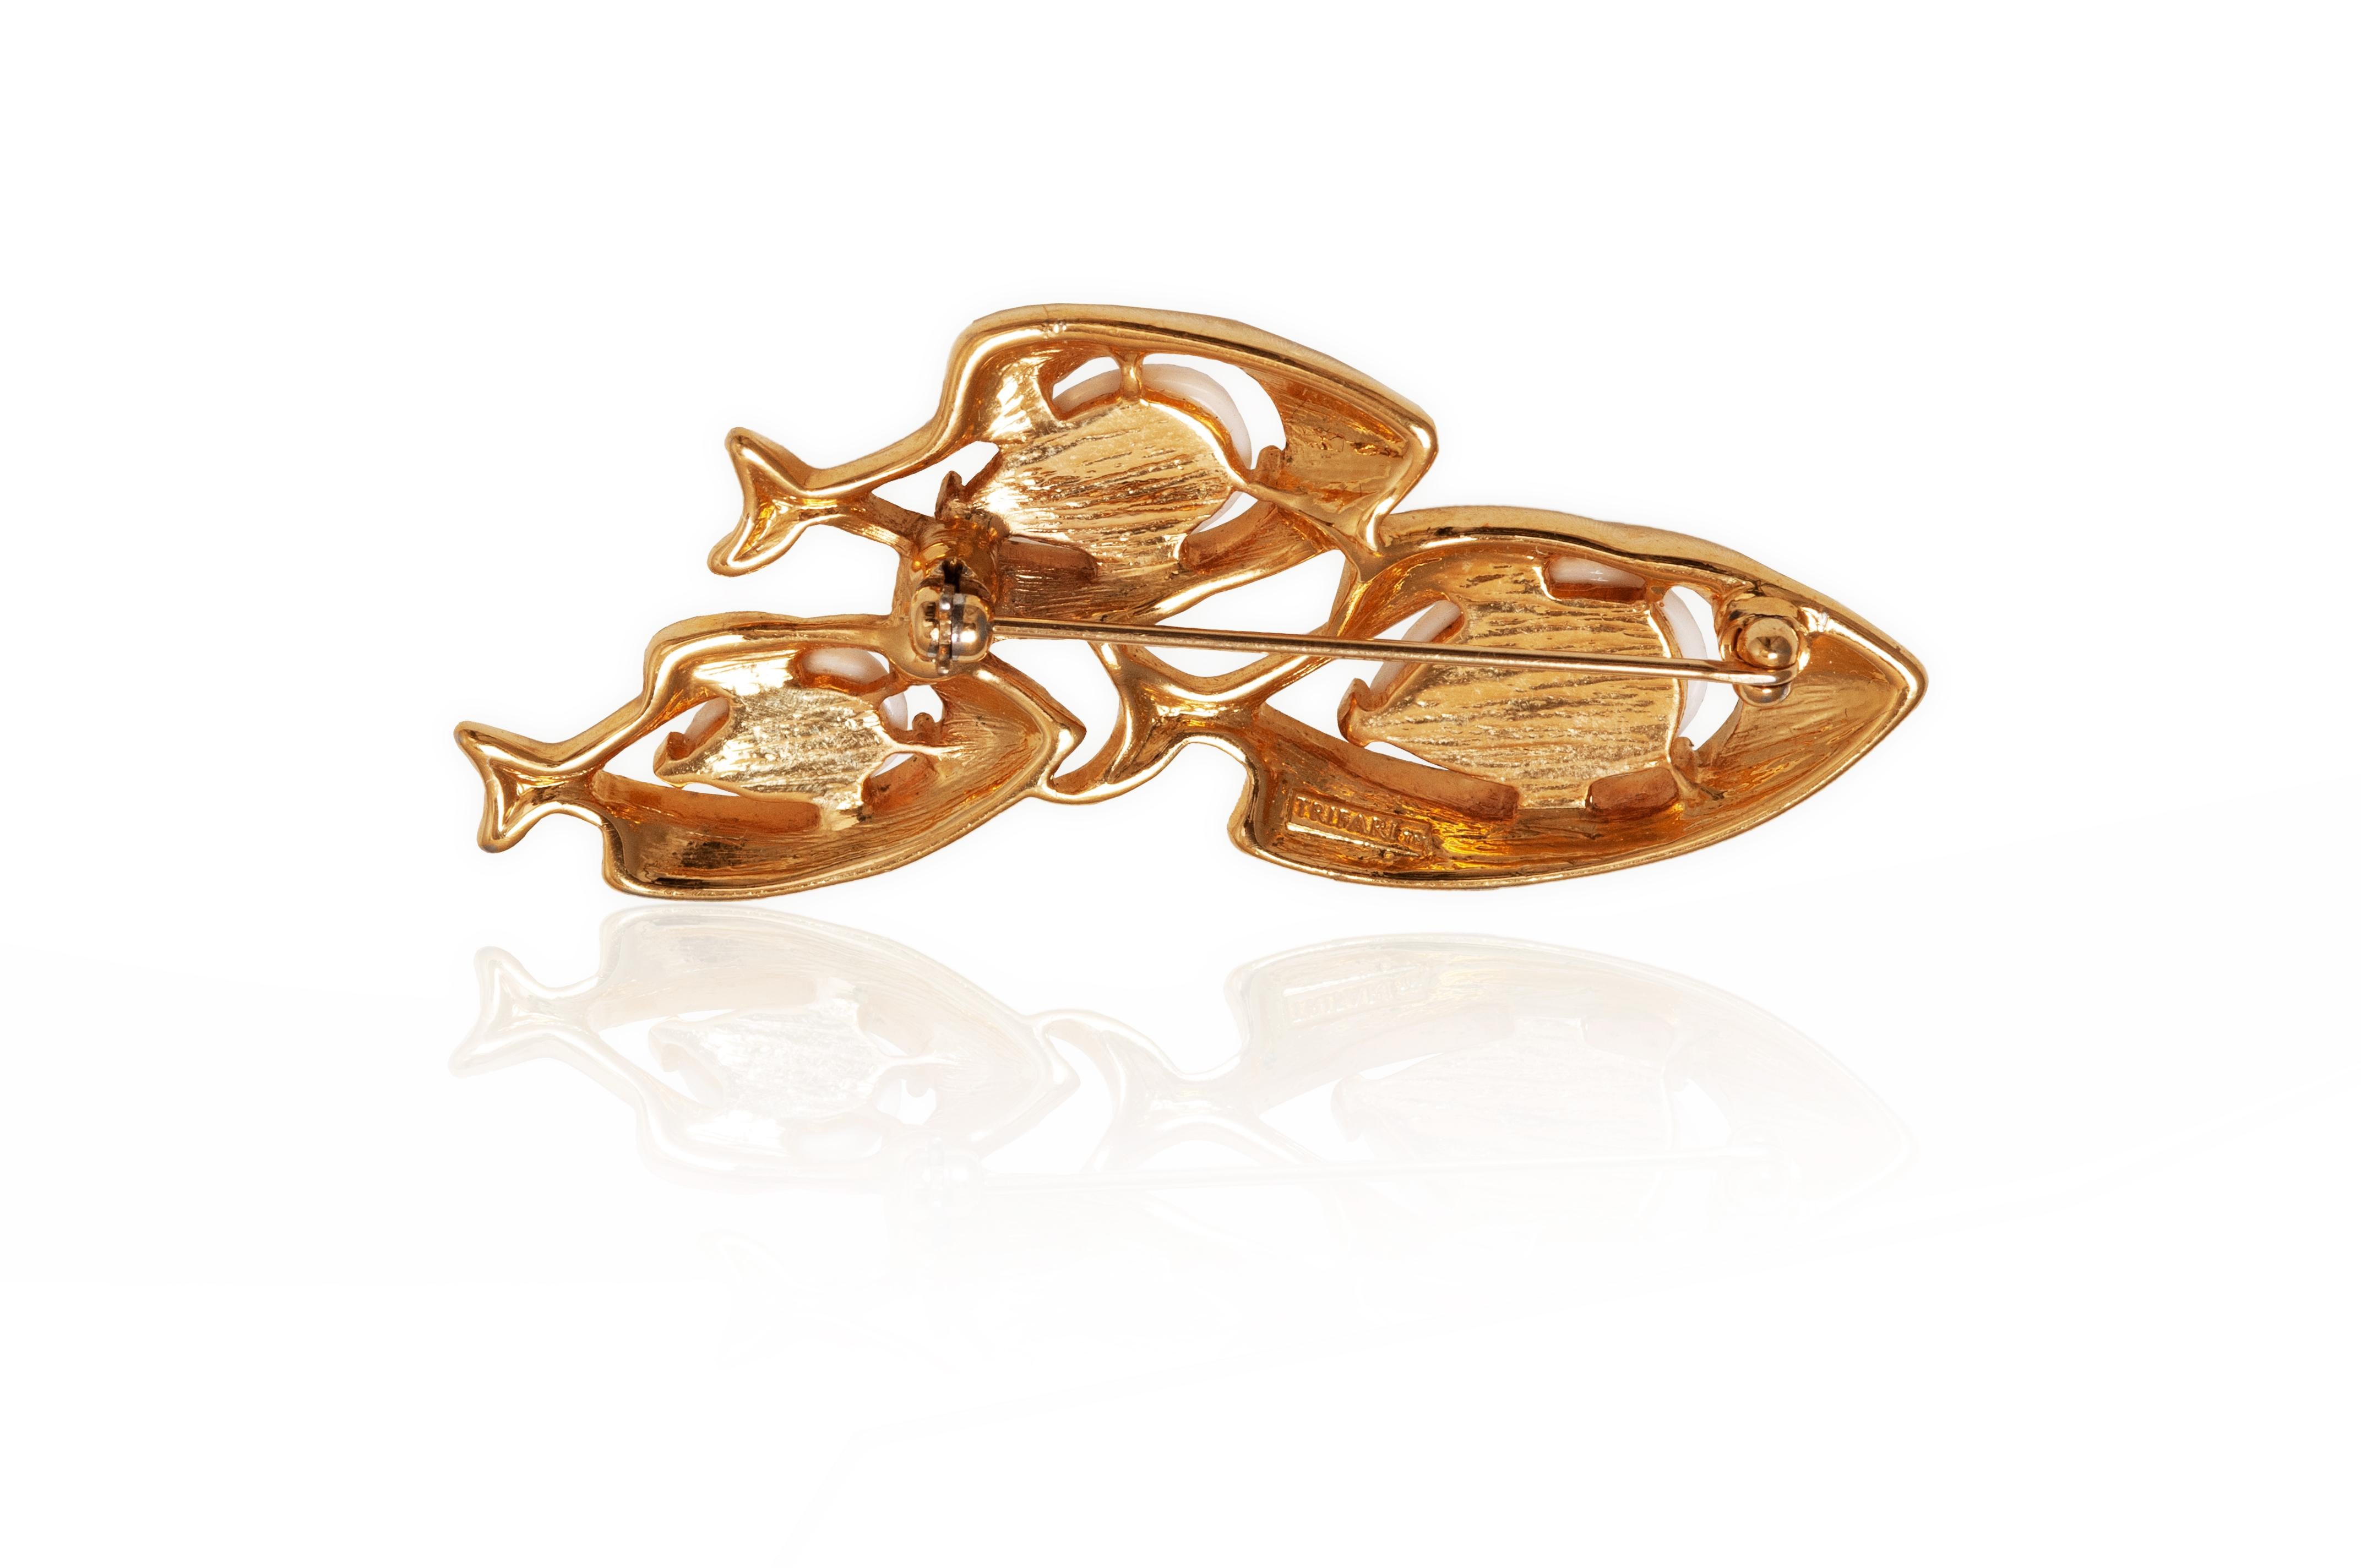 1970s Trifari brooch in the form of 3 fish swimming in a school with a larger fish followed by 2 smaller ones. The fish are made of gold tone metal with their bodies comprised of white moulded glass. The brooch has the mark Trifari TM stamp on the